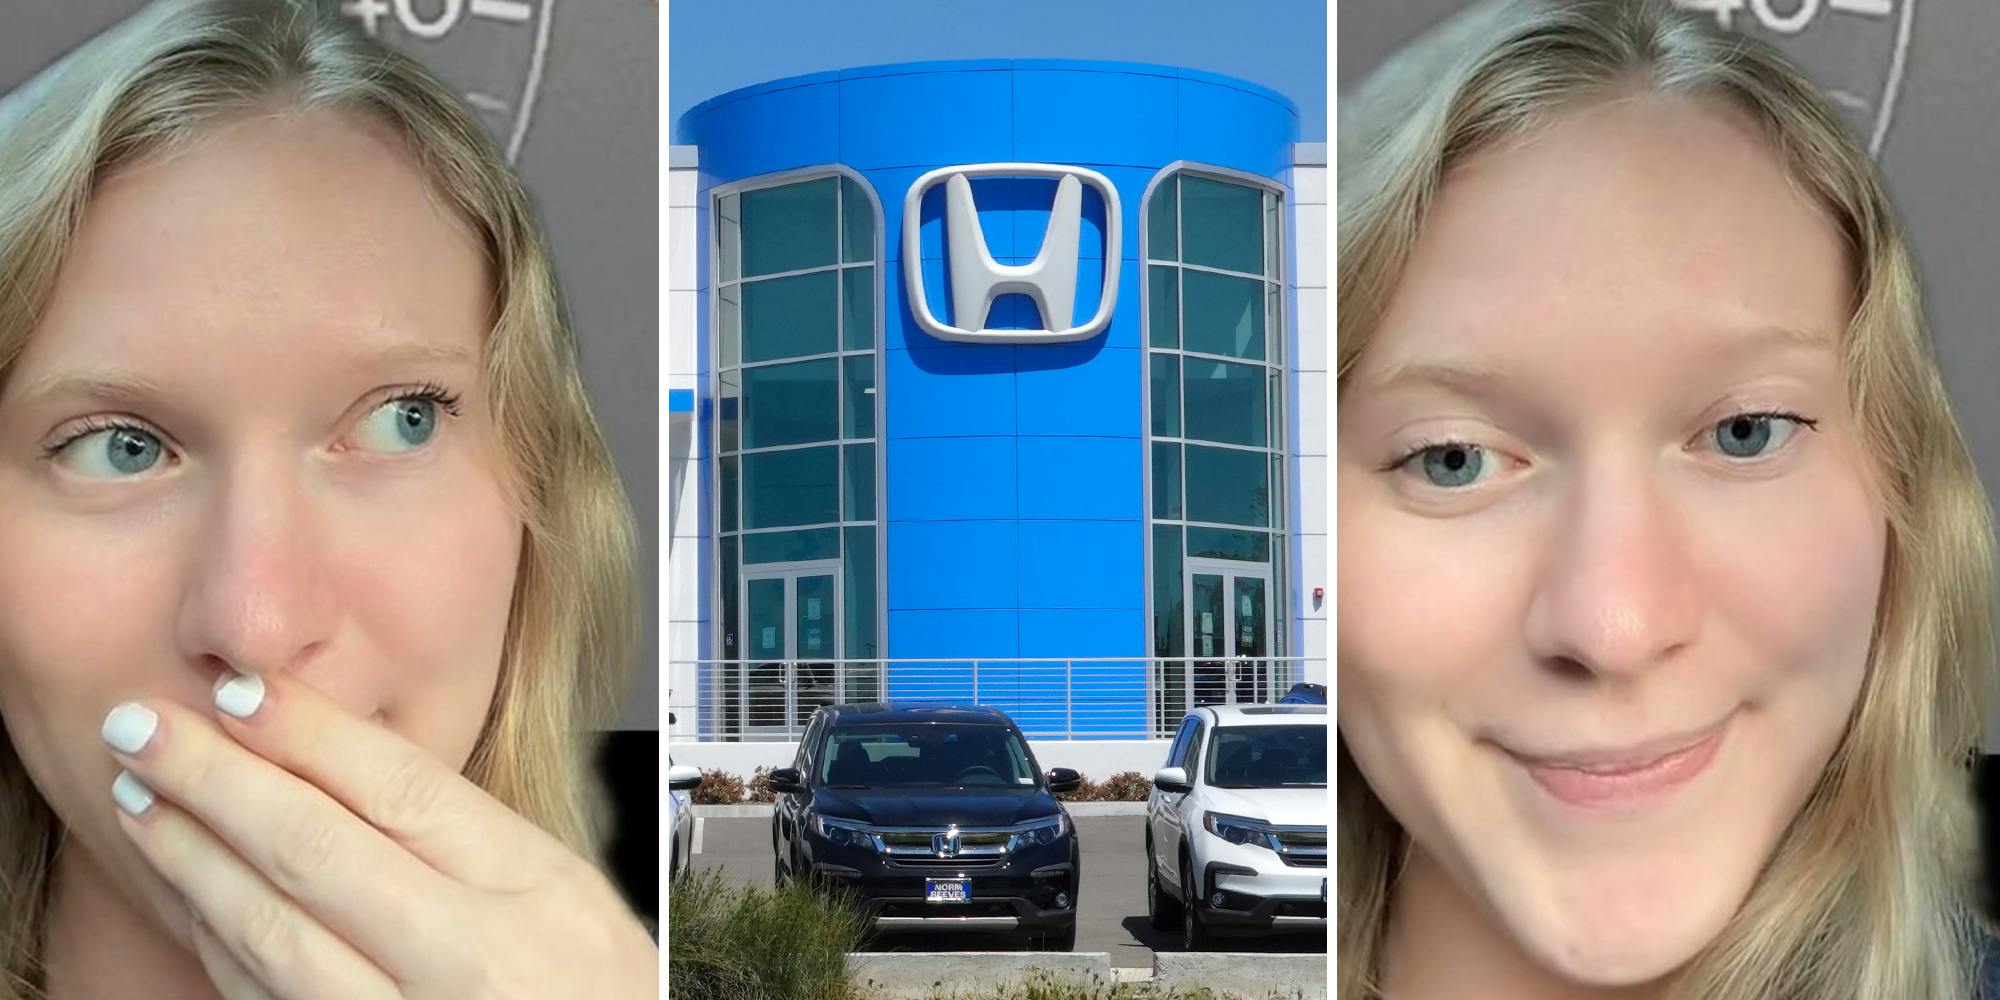 Honda Civic driver says her check engine light went on and then off